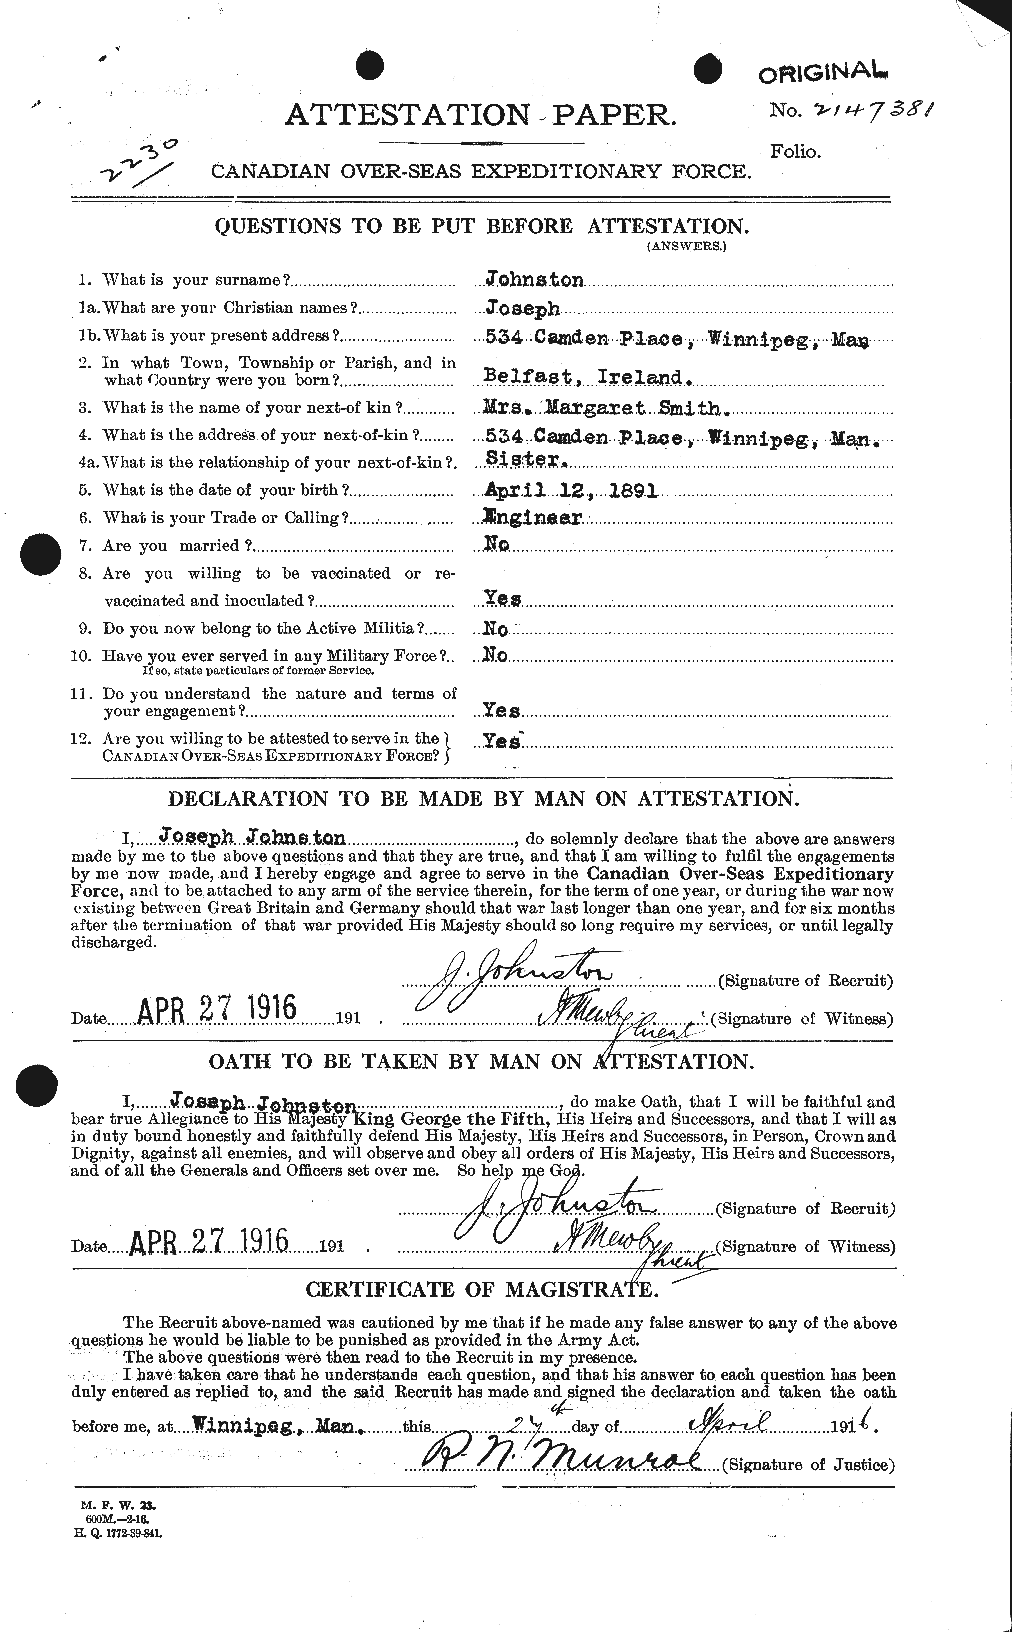 Personnel Records of the First World War - CEF 422893a